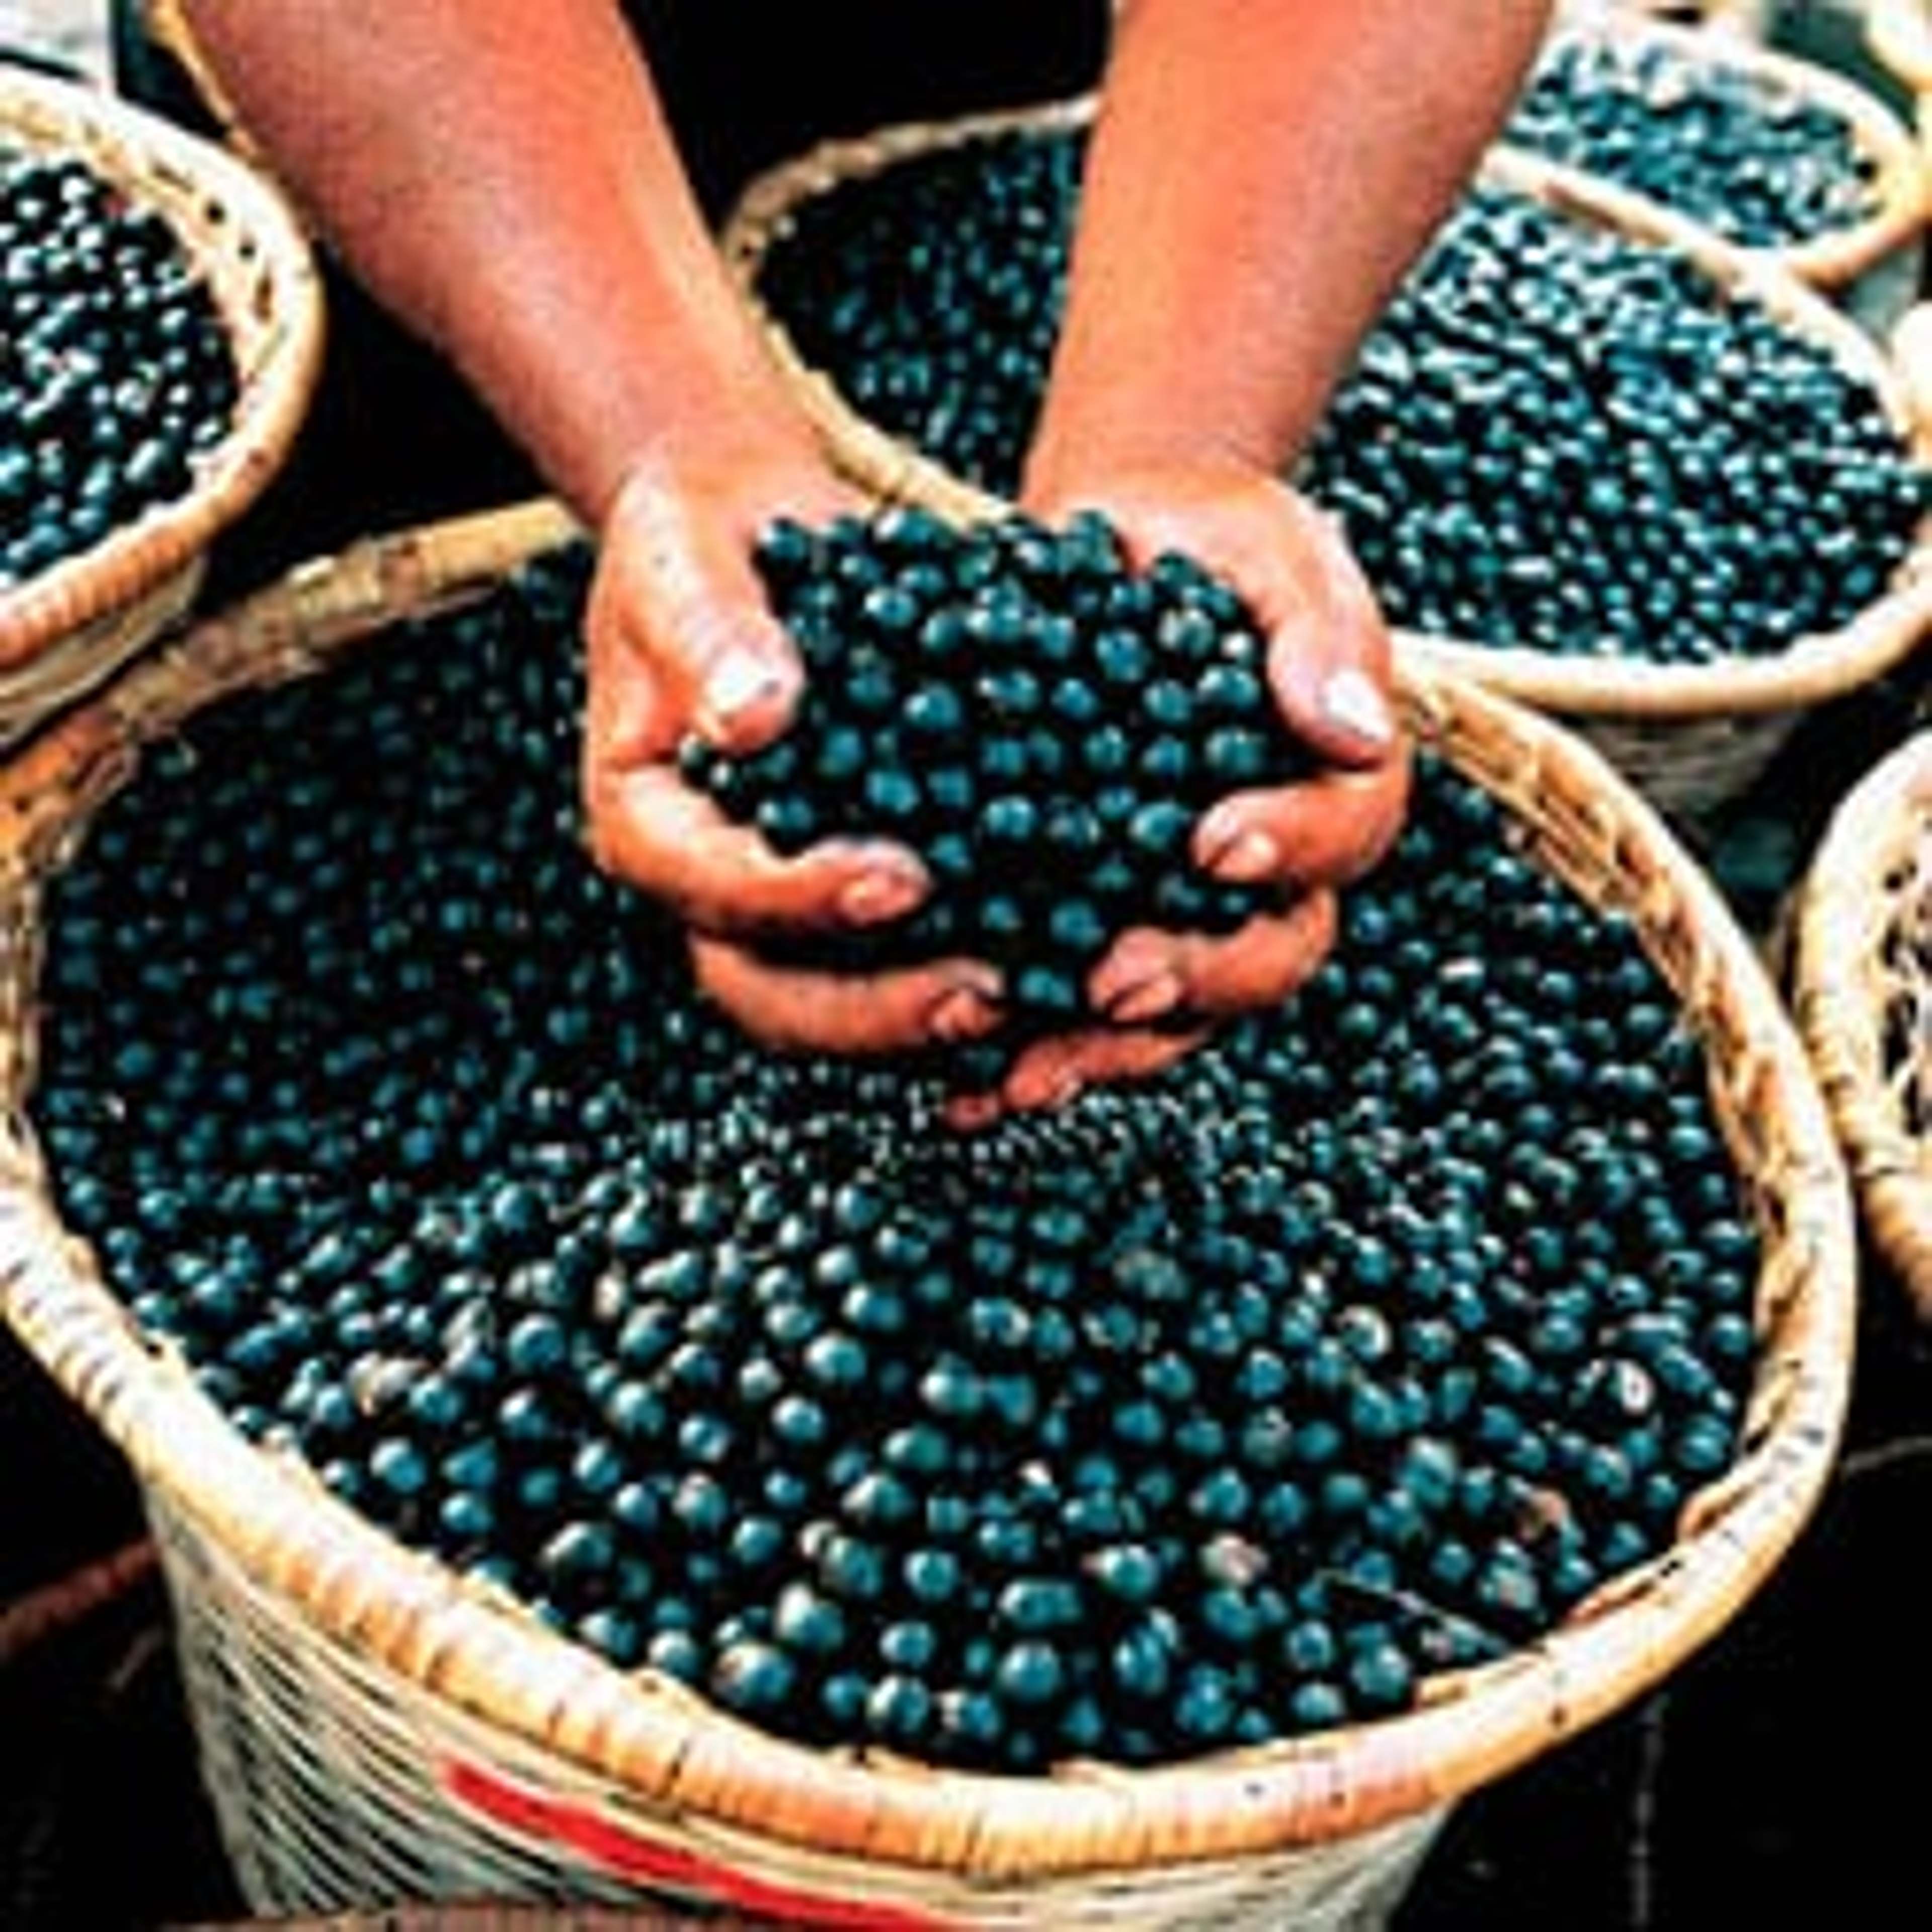 Acai berries have an impressive nutritional profile and an unusually high ORAC content.